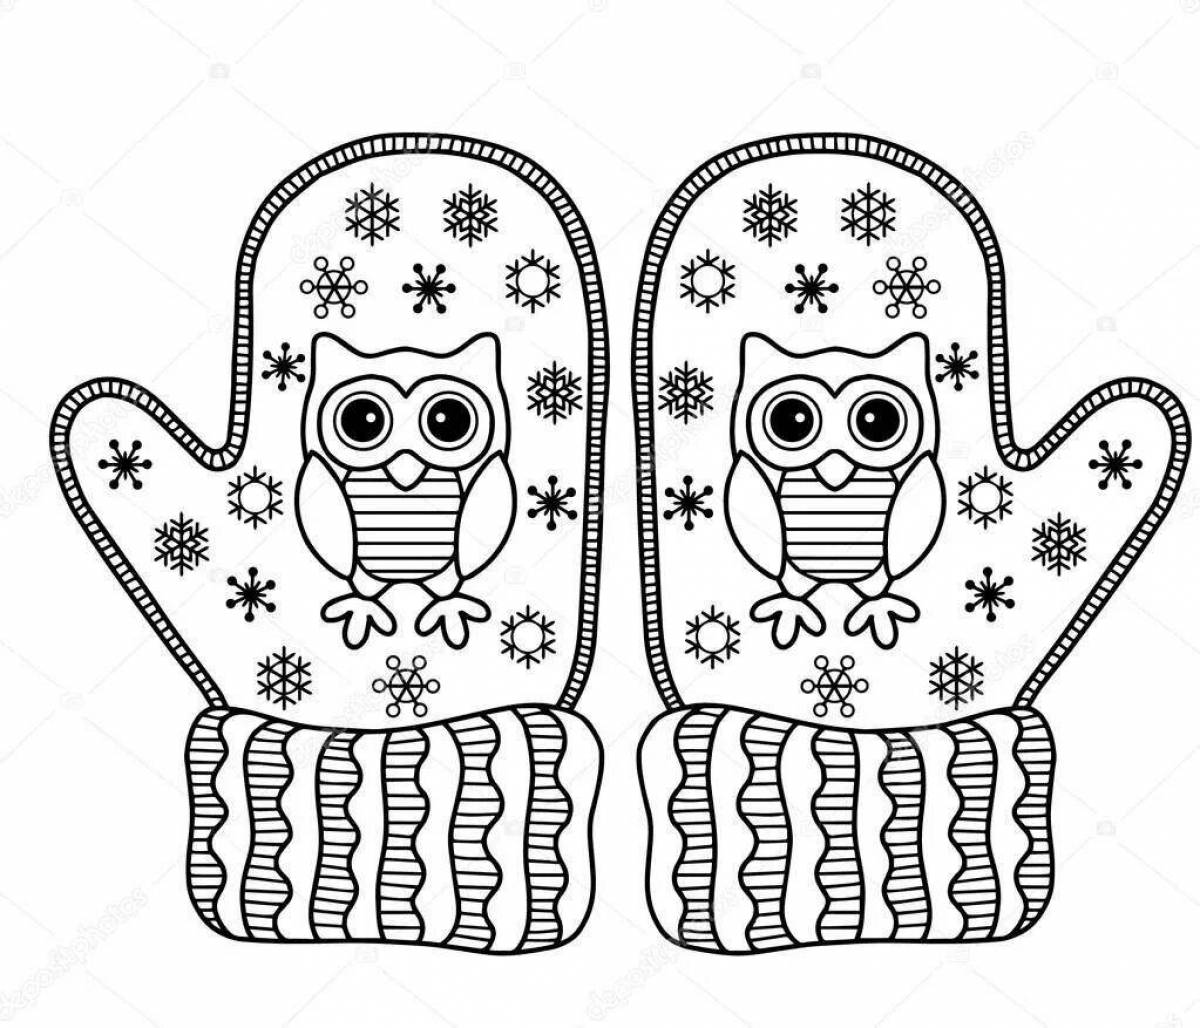 Funny mittens coloring book for kids